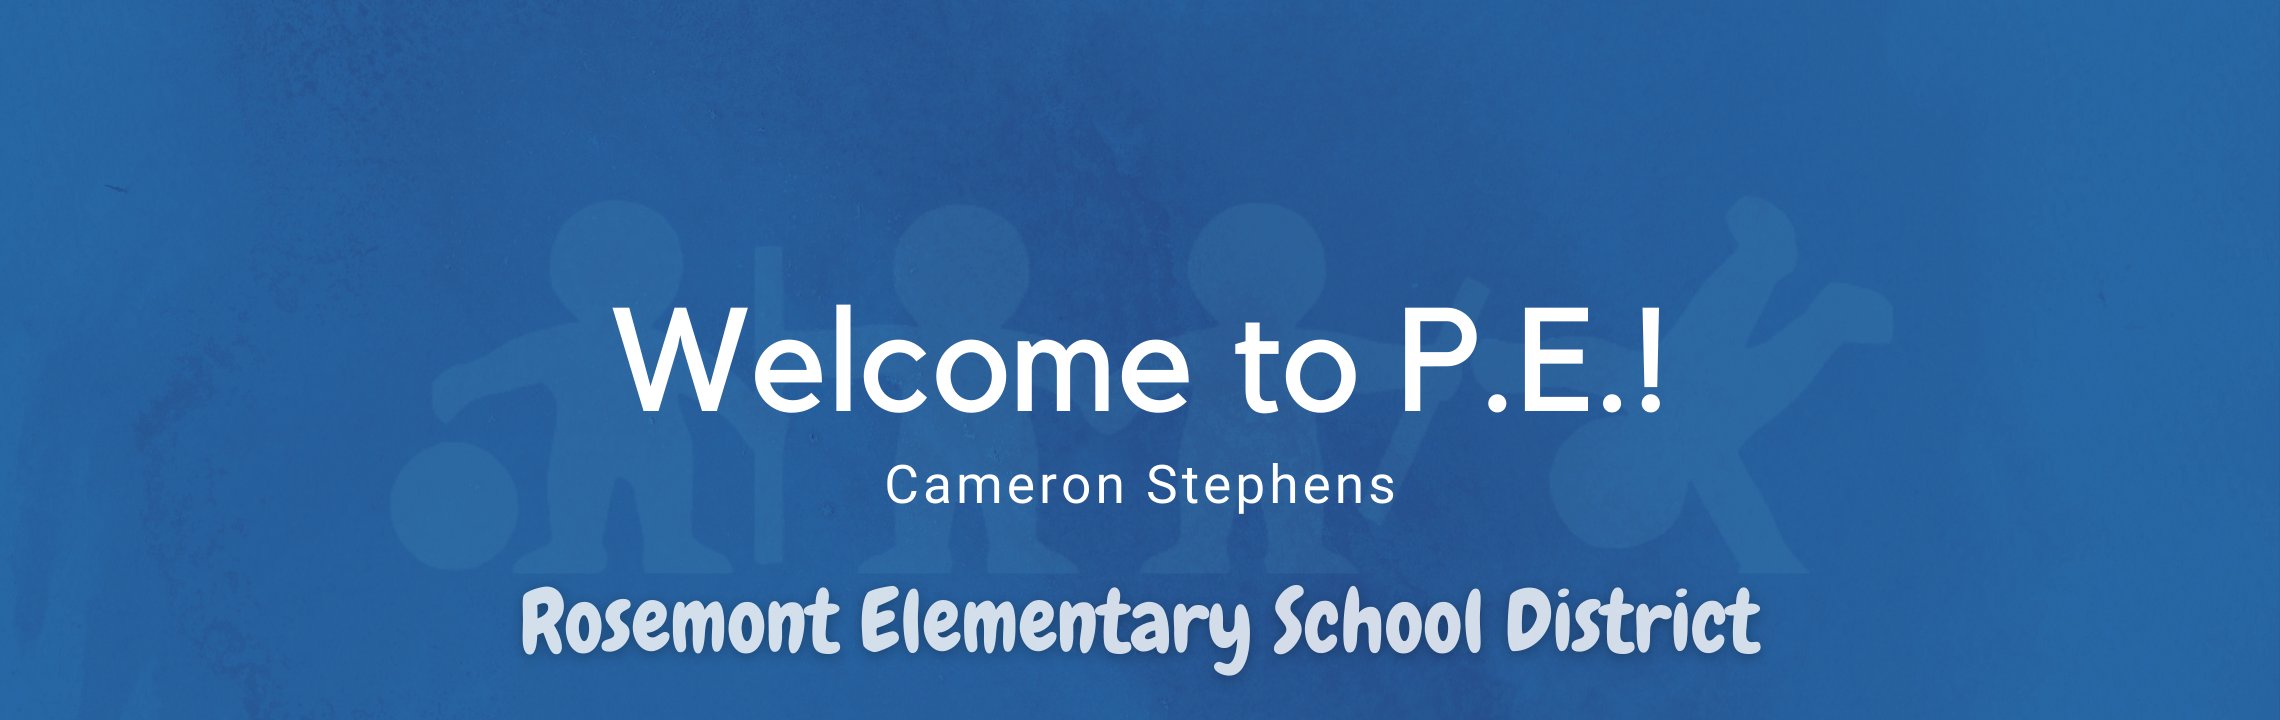 Welcome to P.E., Cameron Stephens, Rosemont Elementary Schools 